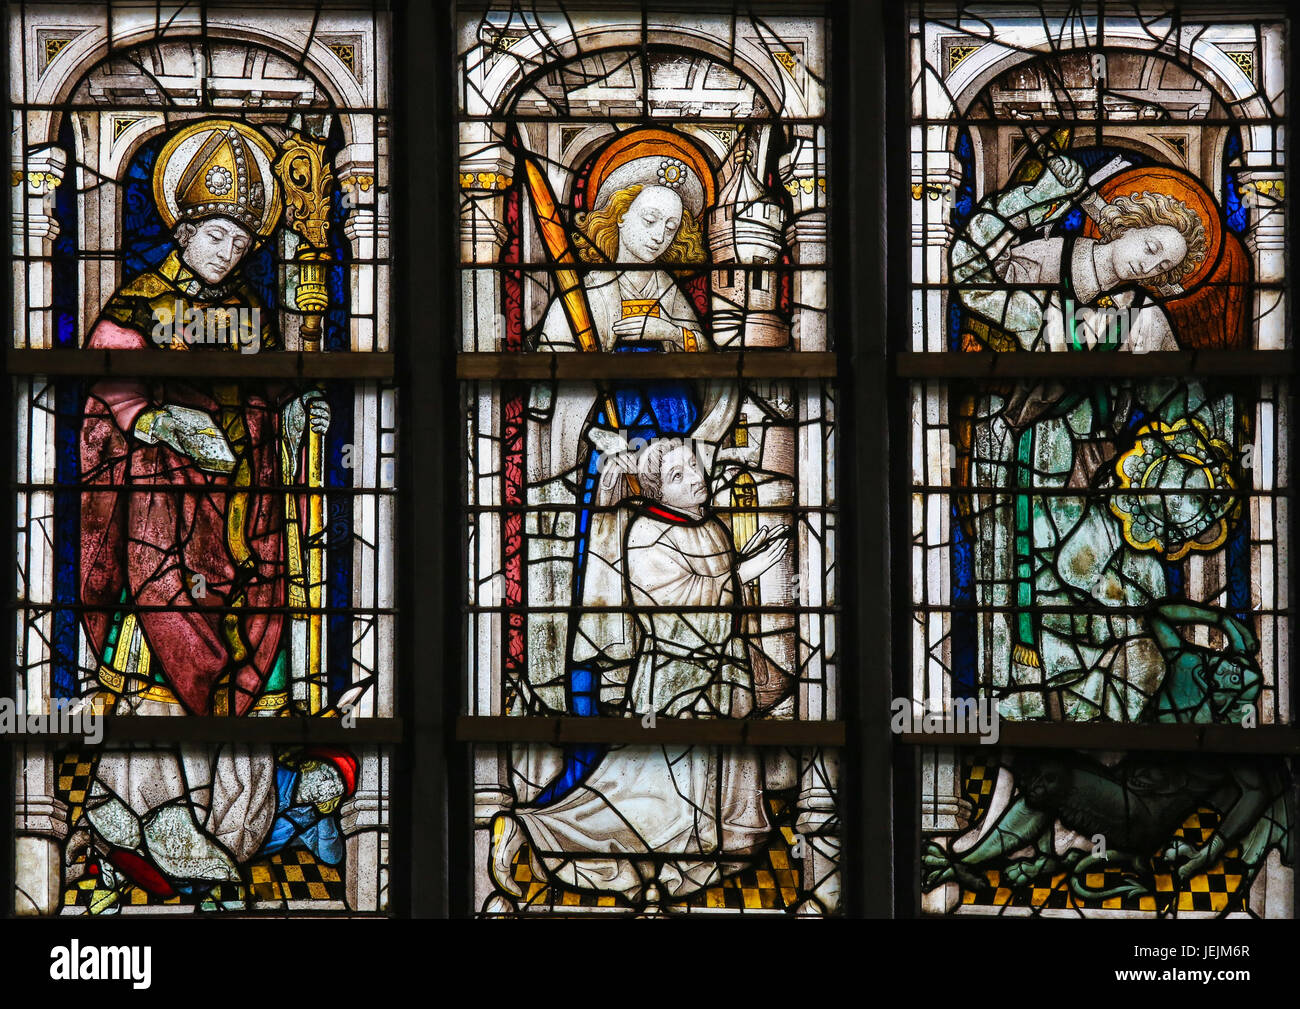 Stained Glass window in St Gummarus Church in Lier, Belgium, depicting Catholic Saints including Saint Michael the Archangel slaying Satan Stock Photo